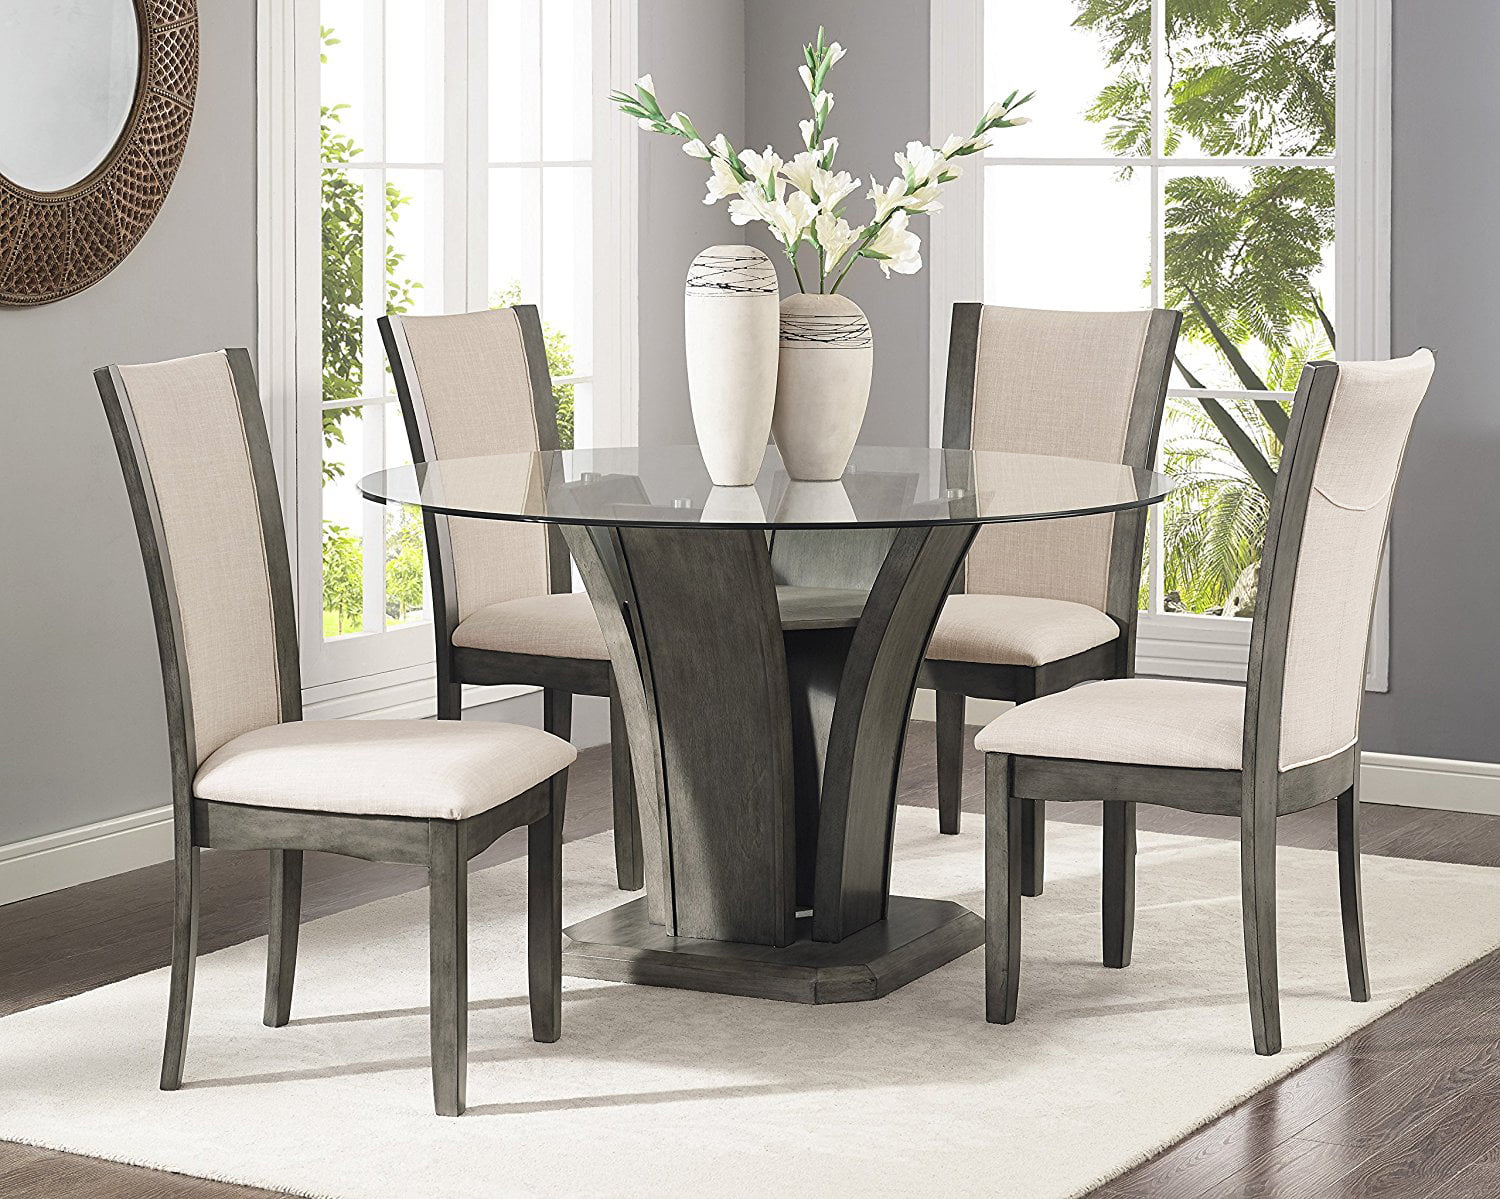 Roundhill Kecco Grey 5 Piece Glass Top Dining Set Table With 4 Chairs Walmart Com Walmart Com